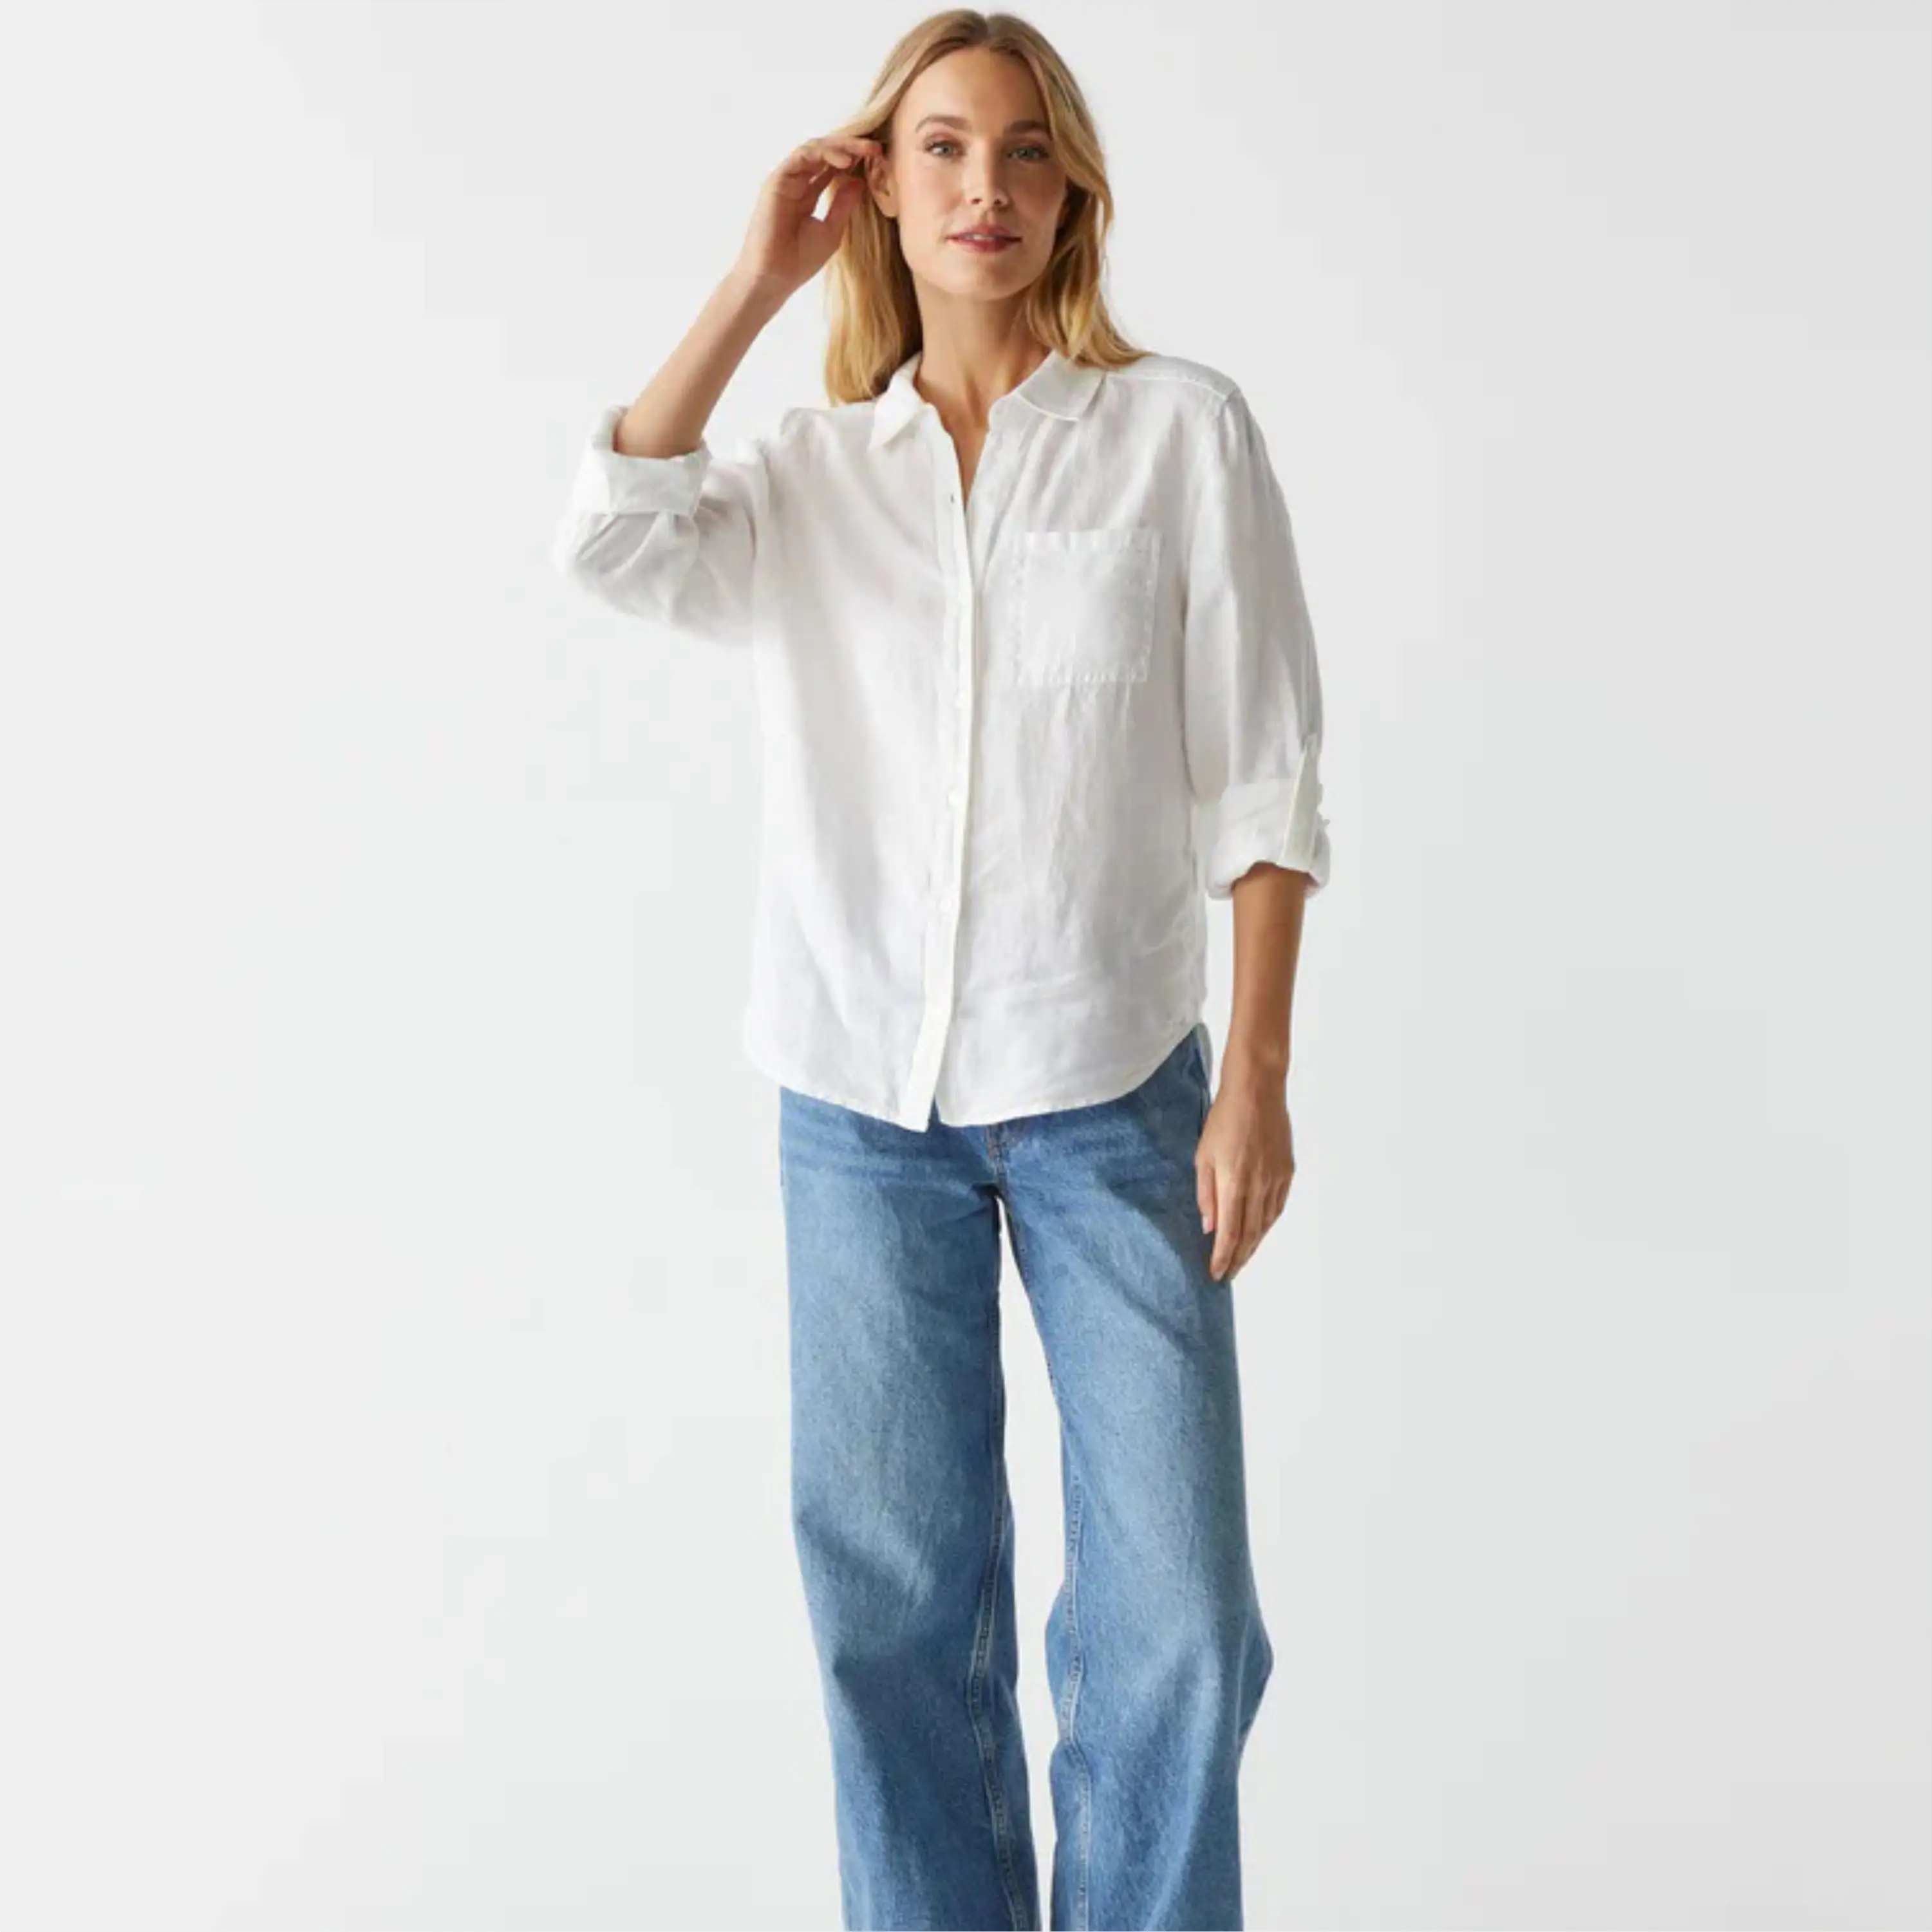 Women's Classic Button-Down Shirt in 100% Cotton - Perfect for Professional Office Wear and Casual Outfits